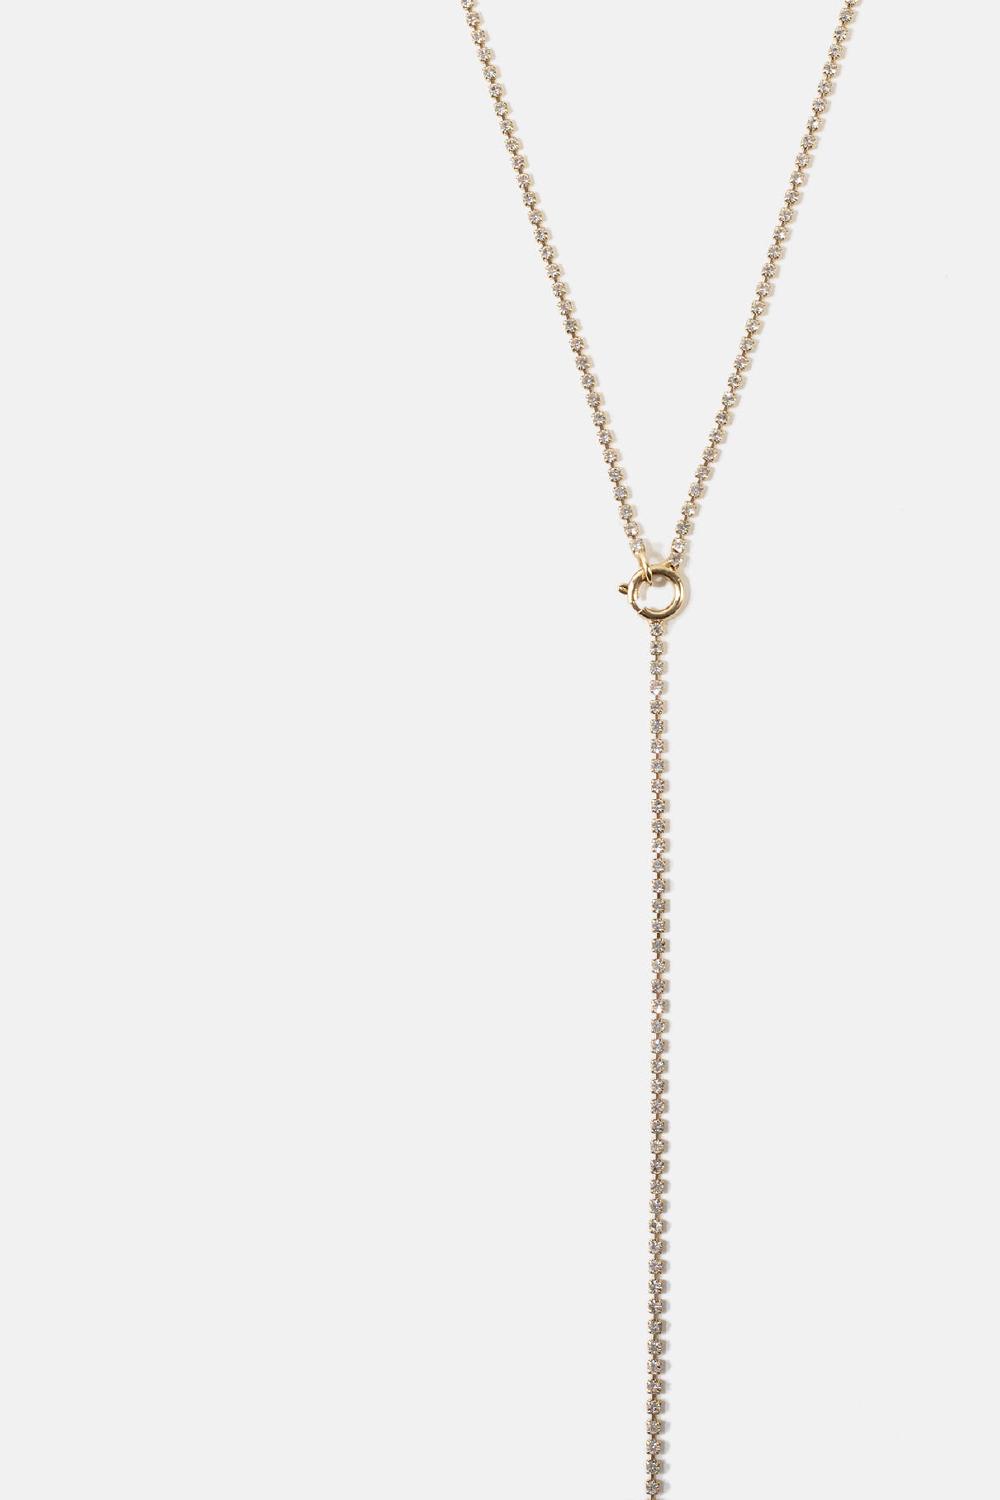 Harley Necklace, Women, Gold